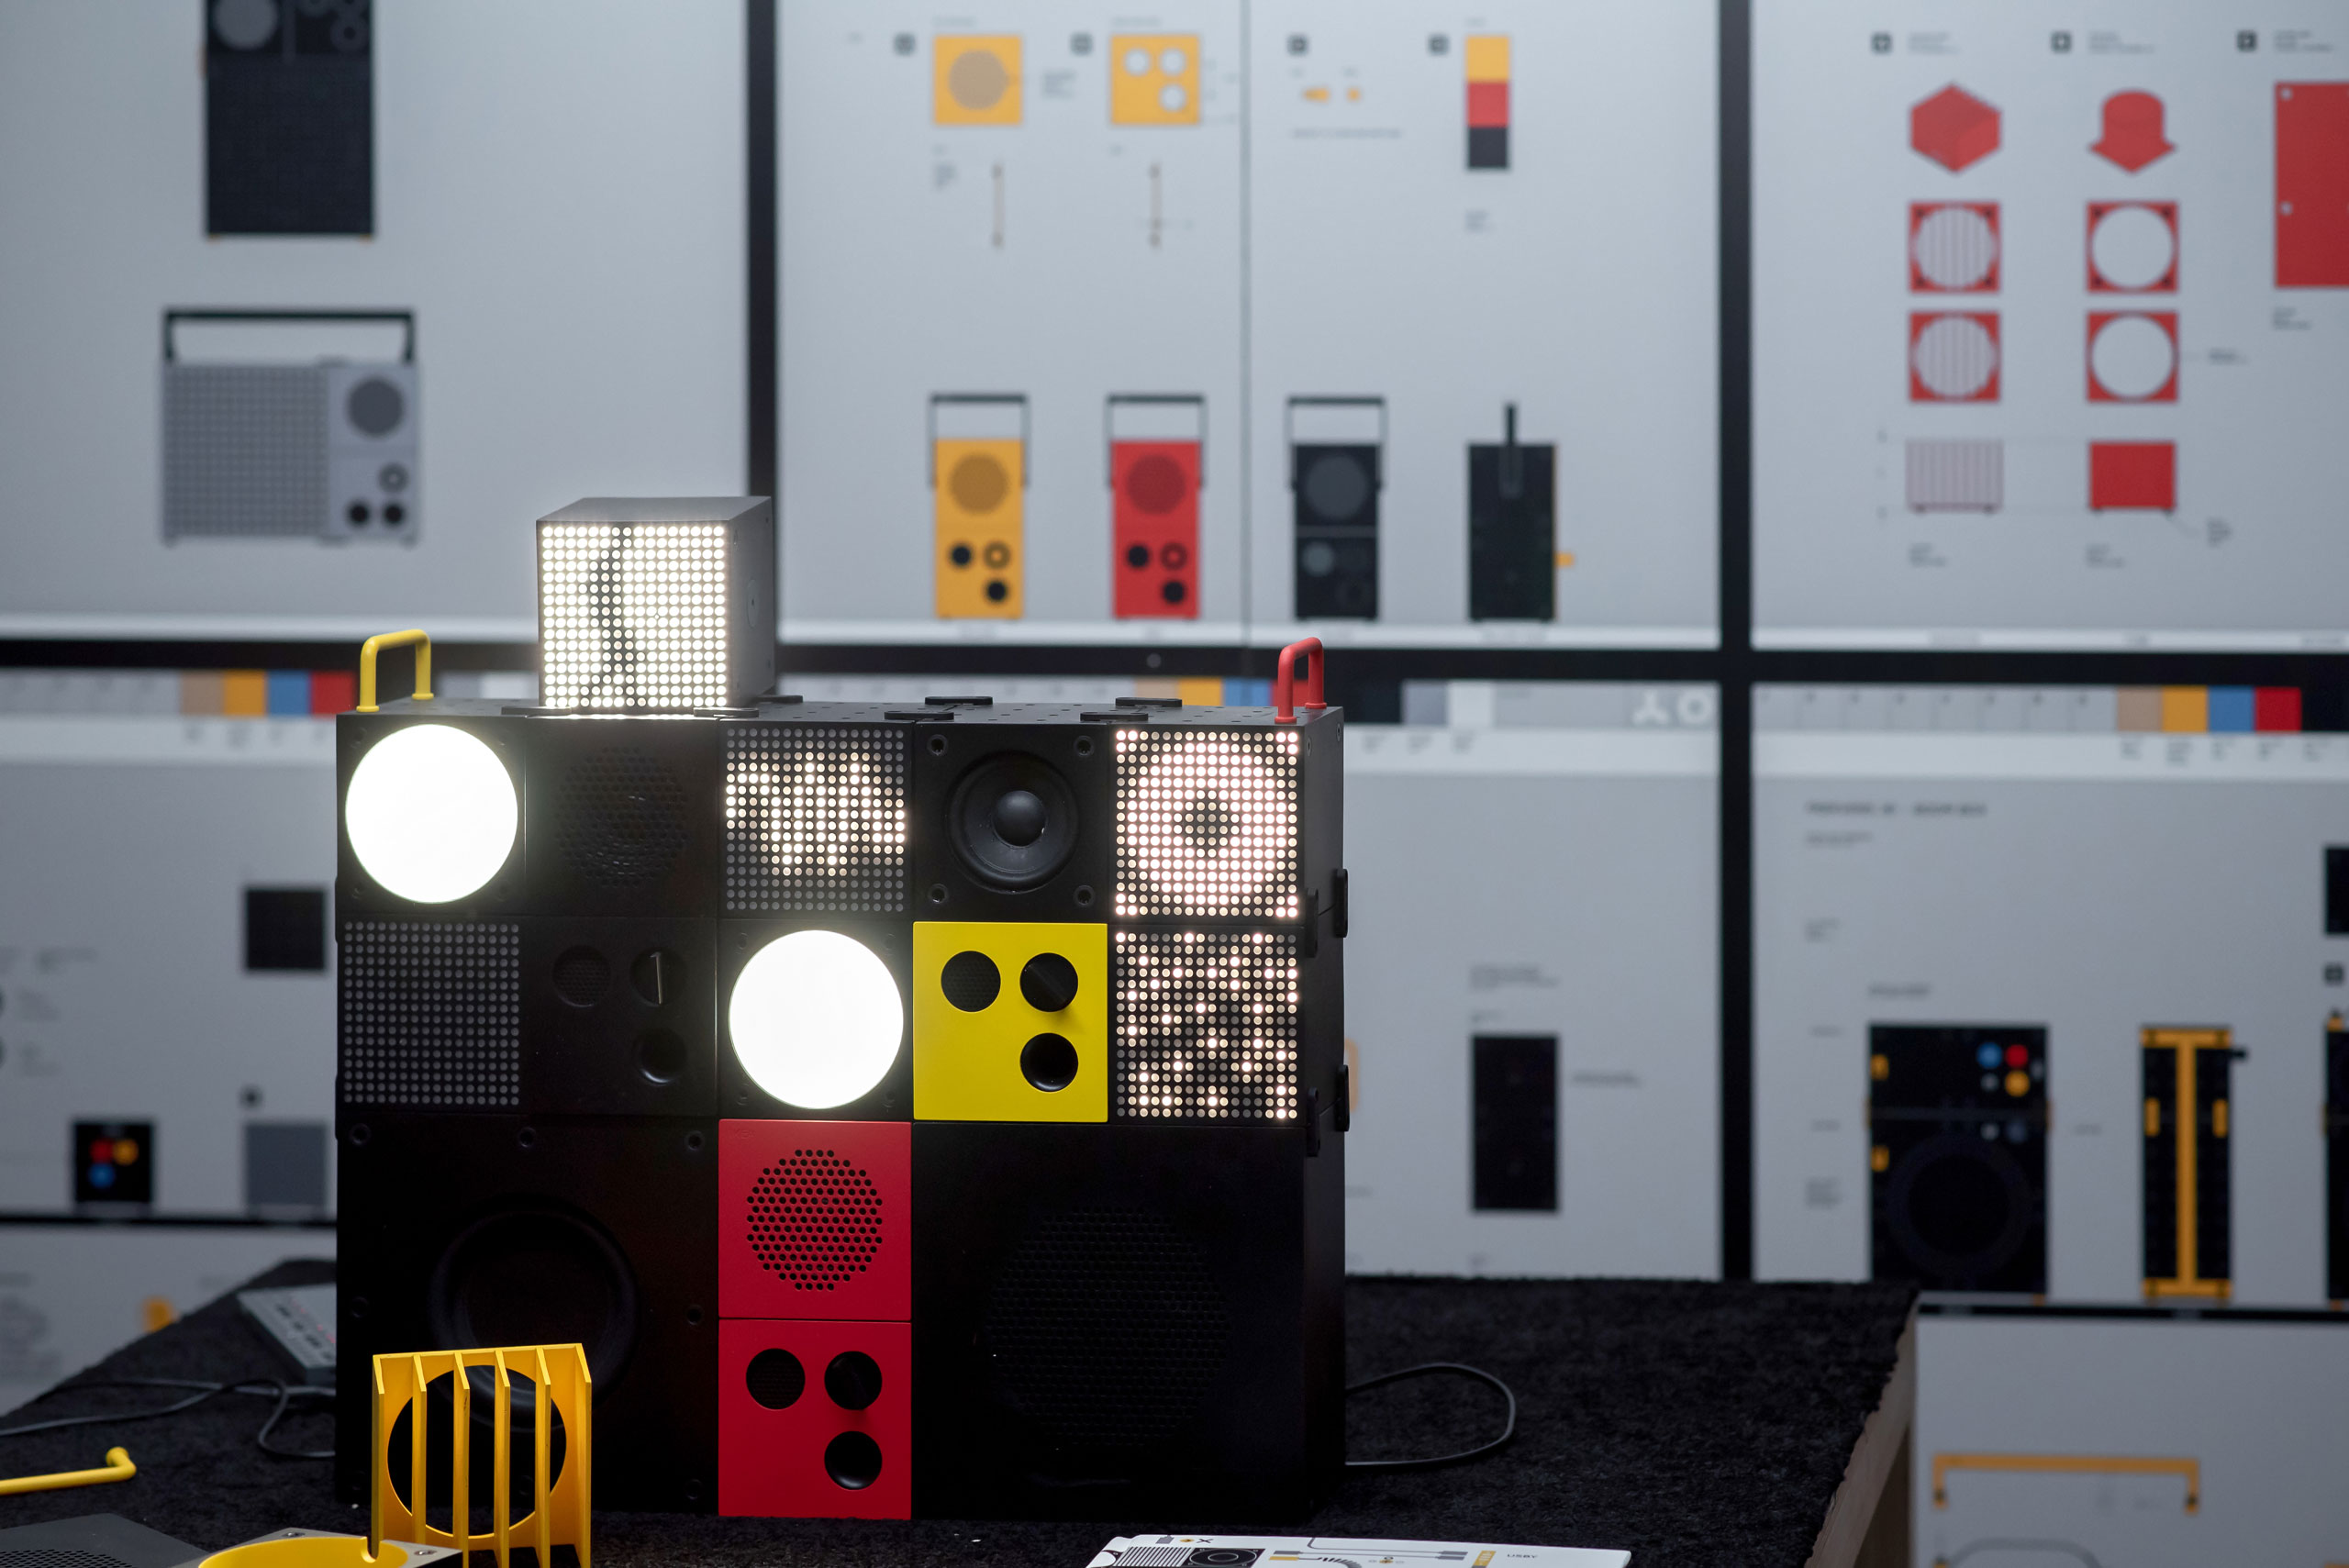 FREKVENS portable music collection by Ikea in collaboration with teenage engineering.Available for a limited time starting in September 2018.Photo by Elias Joidos, Älmhult, Sweden.